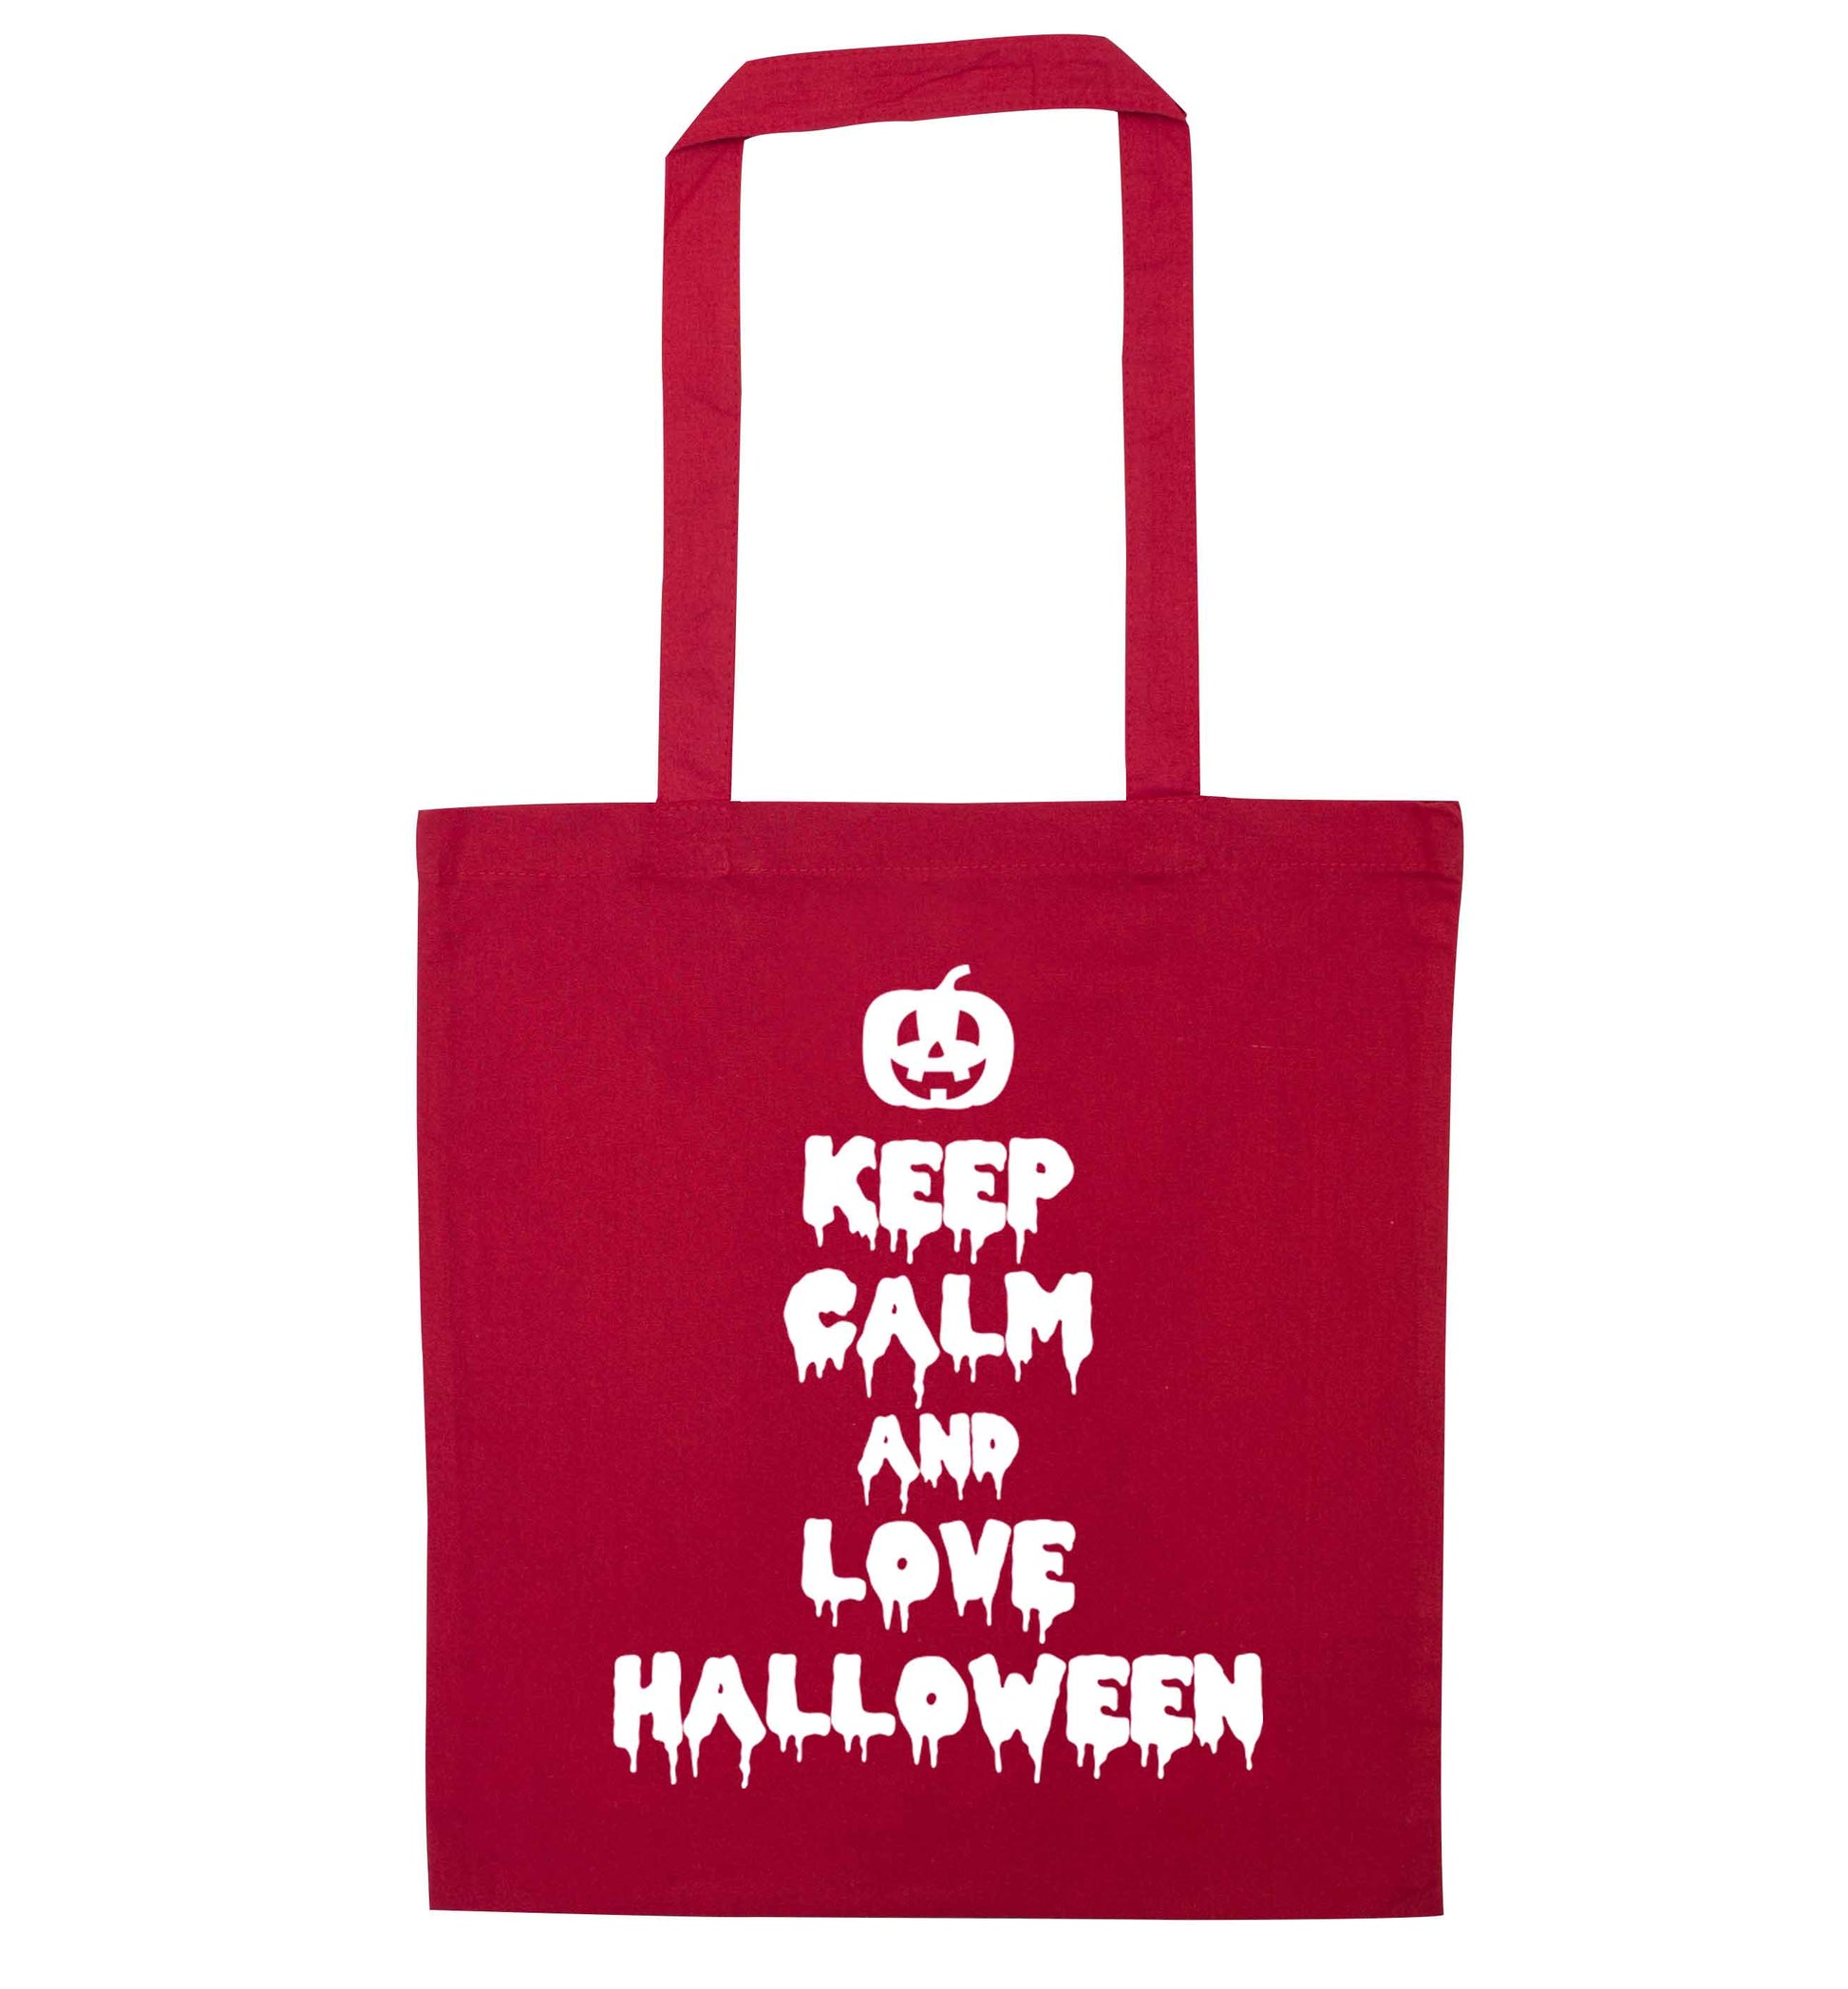 Keep calm and love halloween red tote bag